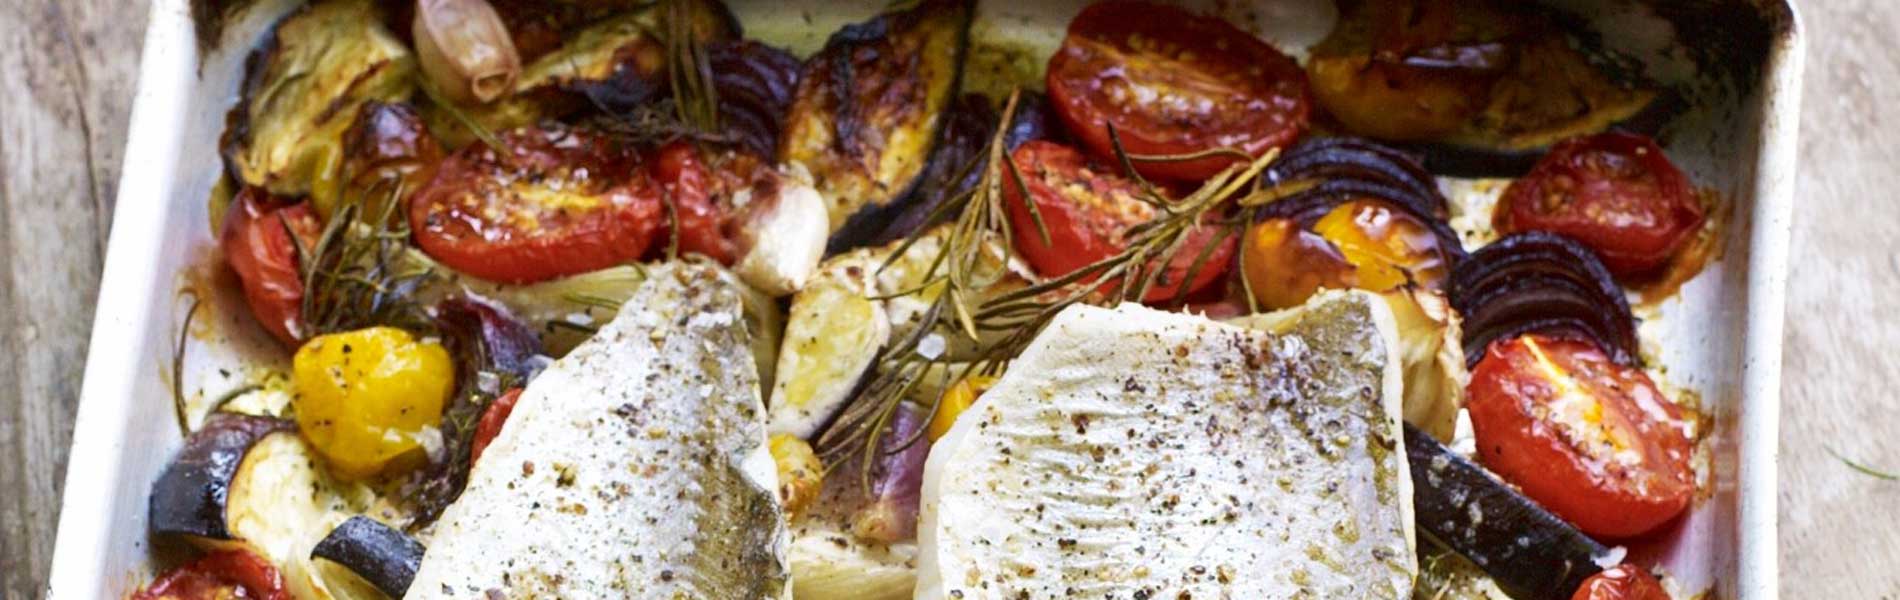 Gill Meller: Roast Aubergine, Fennel and Tomatoes with Baked Fish and Herbs